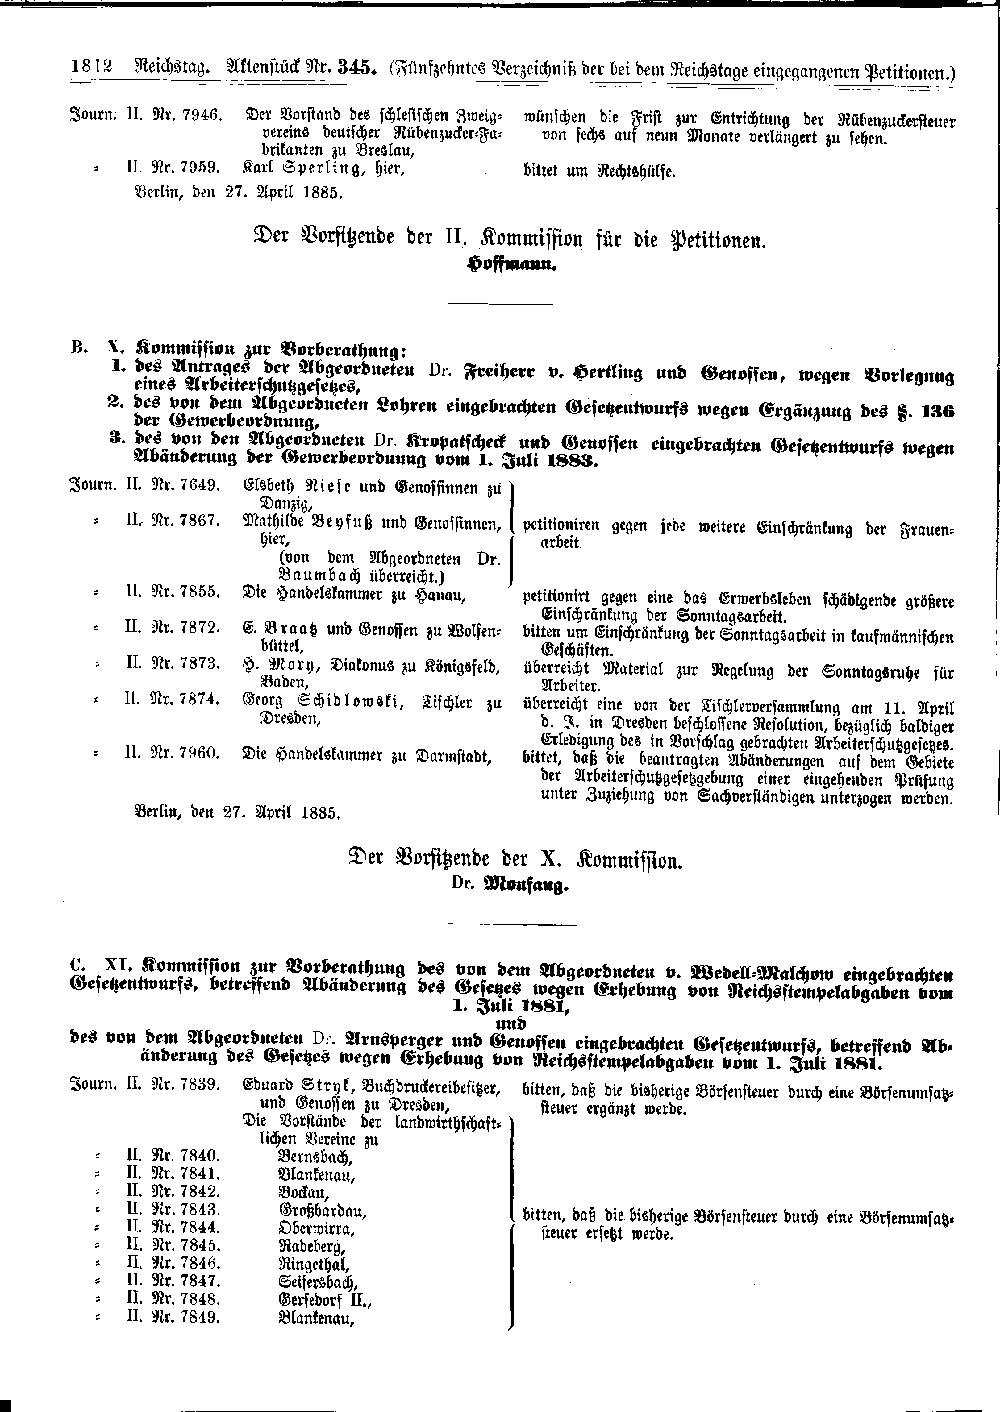 Scan of page 1812